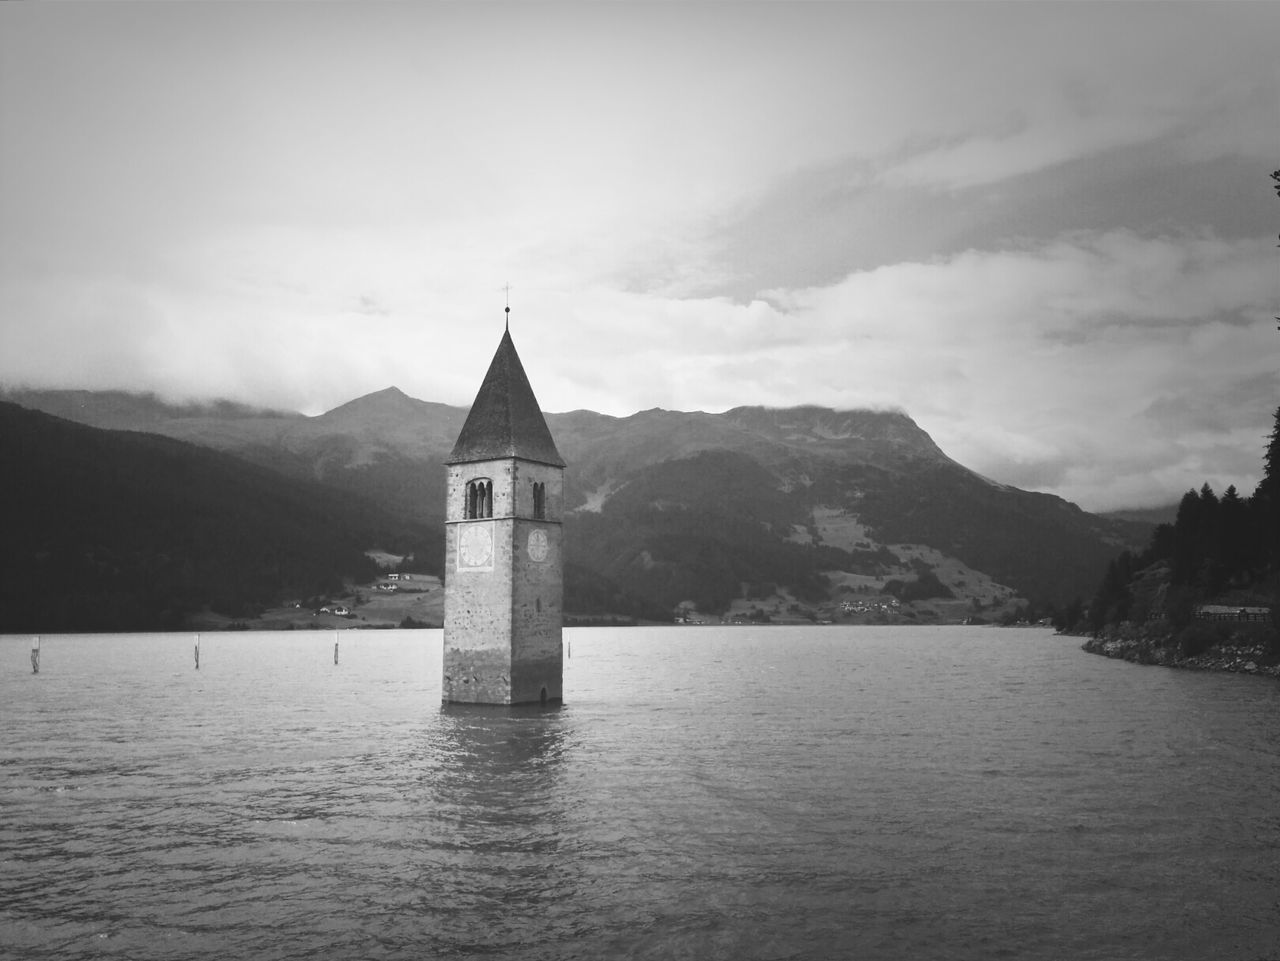 Stone tower rising above of water